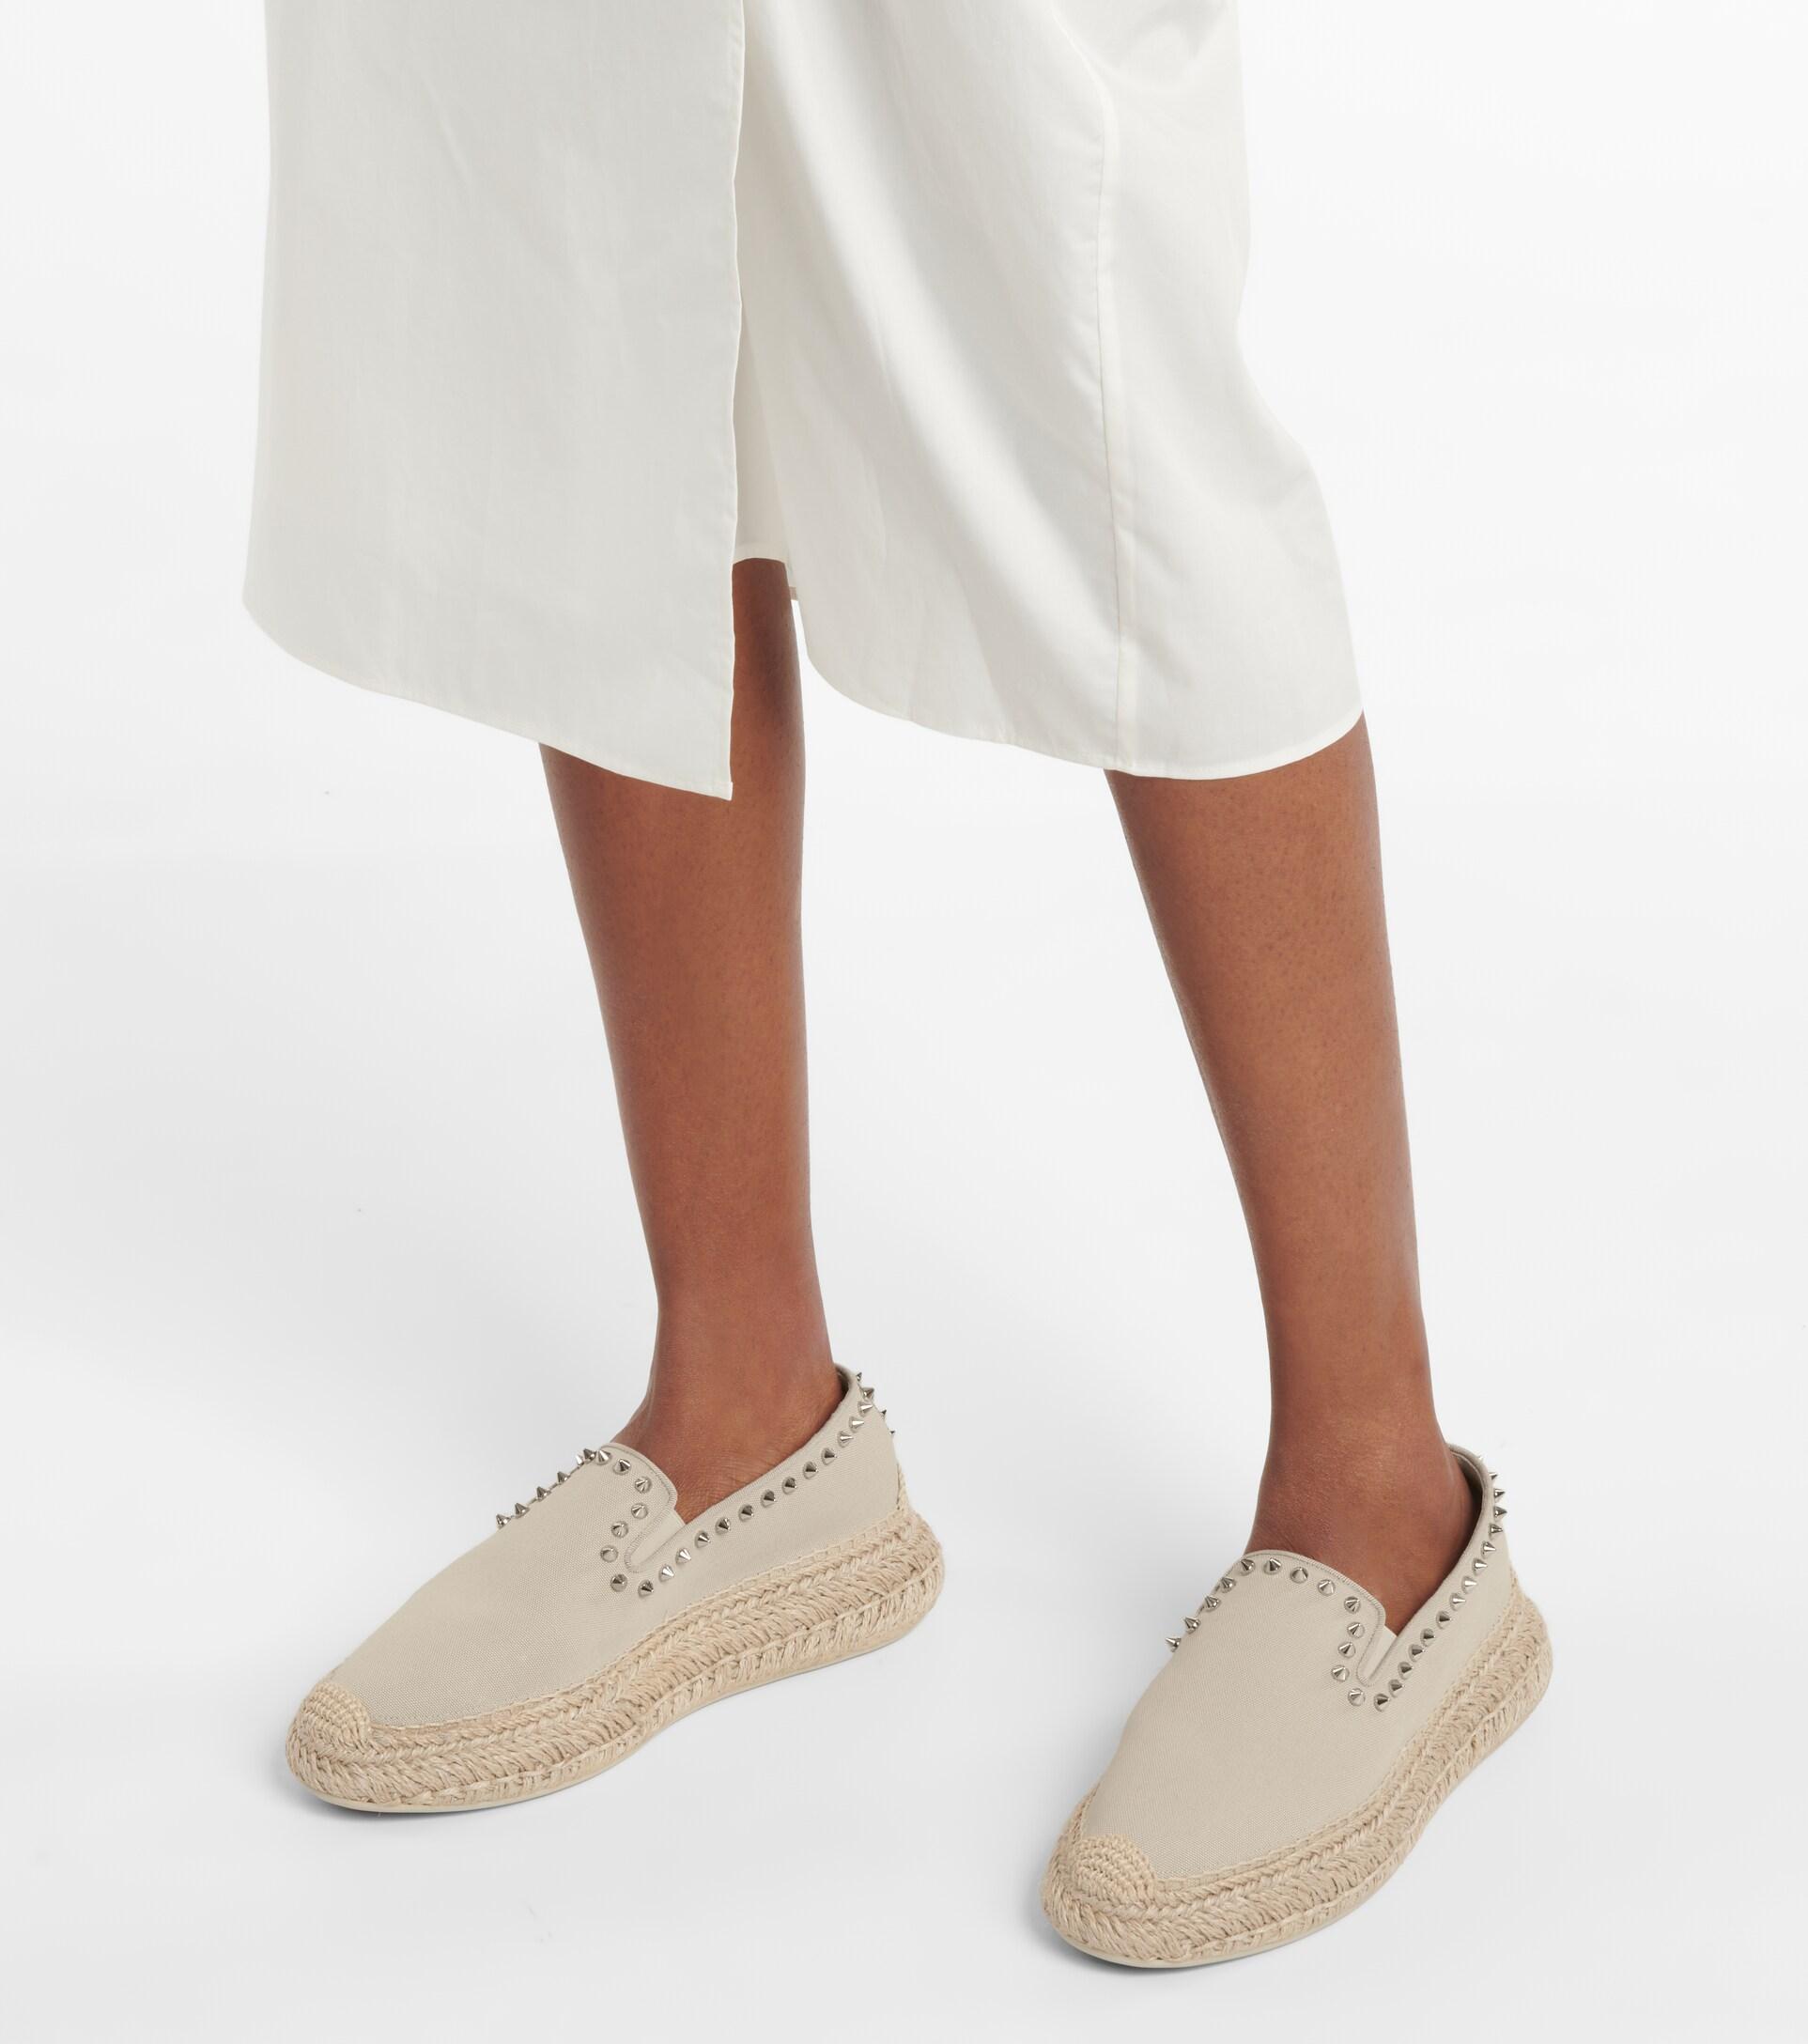 Christian Louboutin Espaboat Studded Canvas Espadrilles in Natural | Lyst